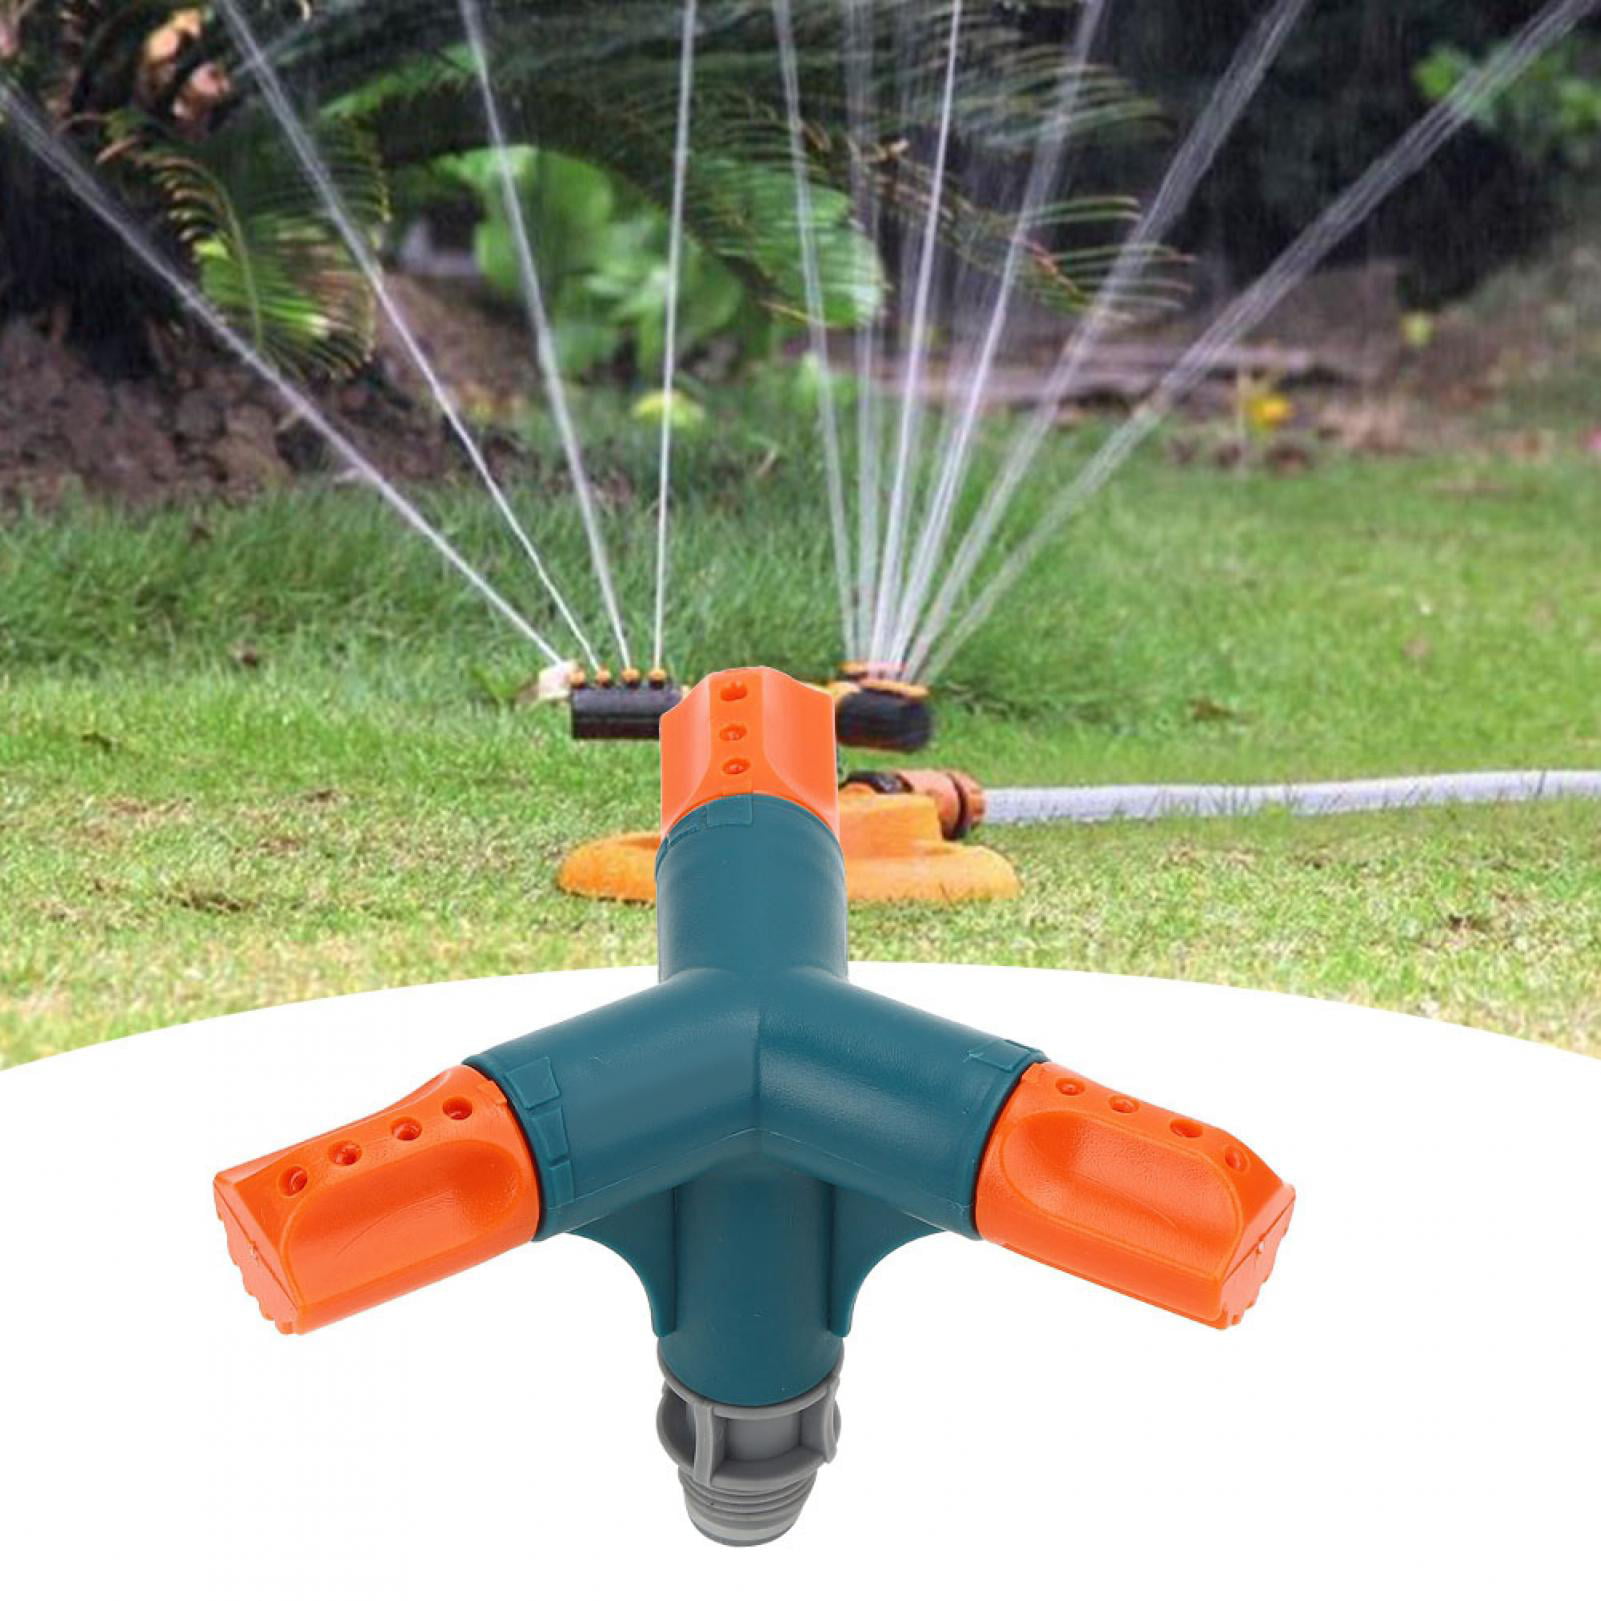 Details about   Watering Spray Nozzles Sprinkler Nozzle Sprayer Irrigation 2Pcs Water Sprayer YD 